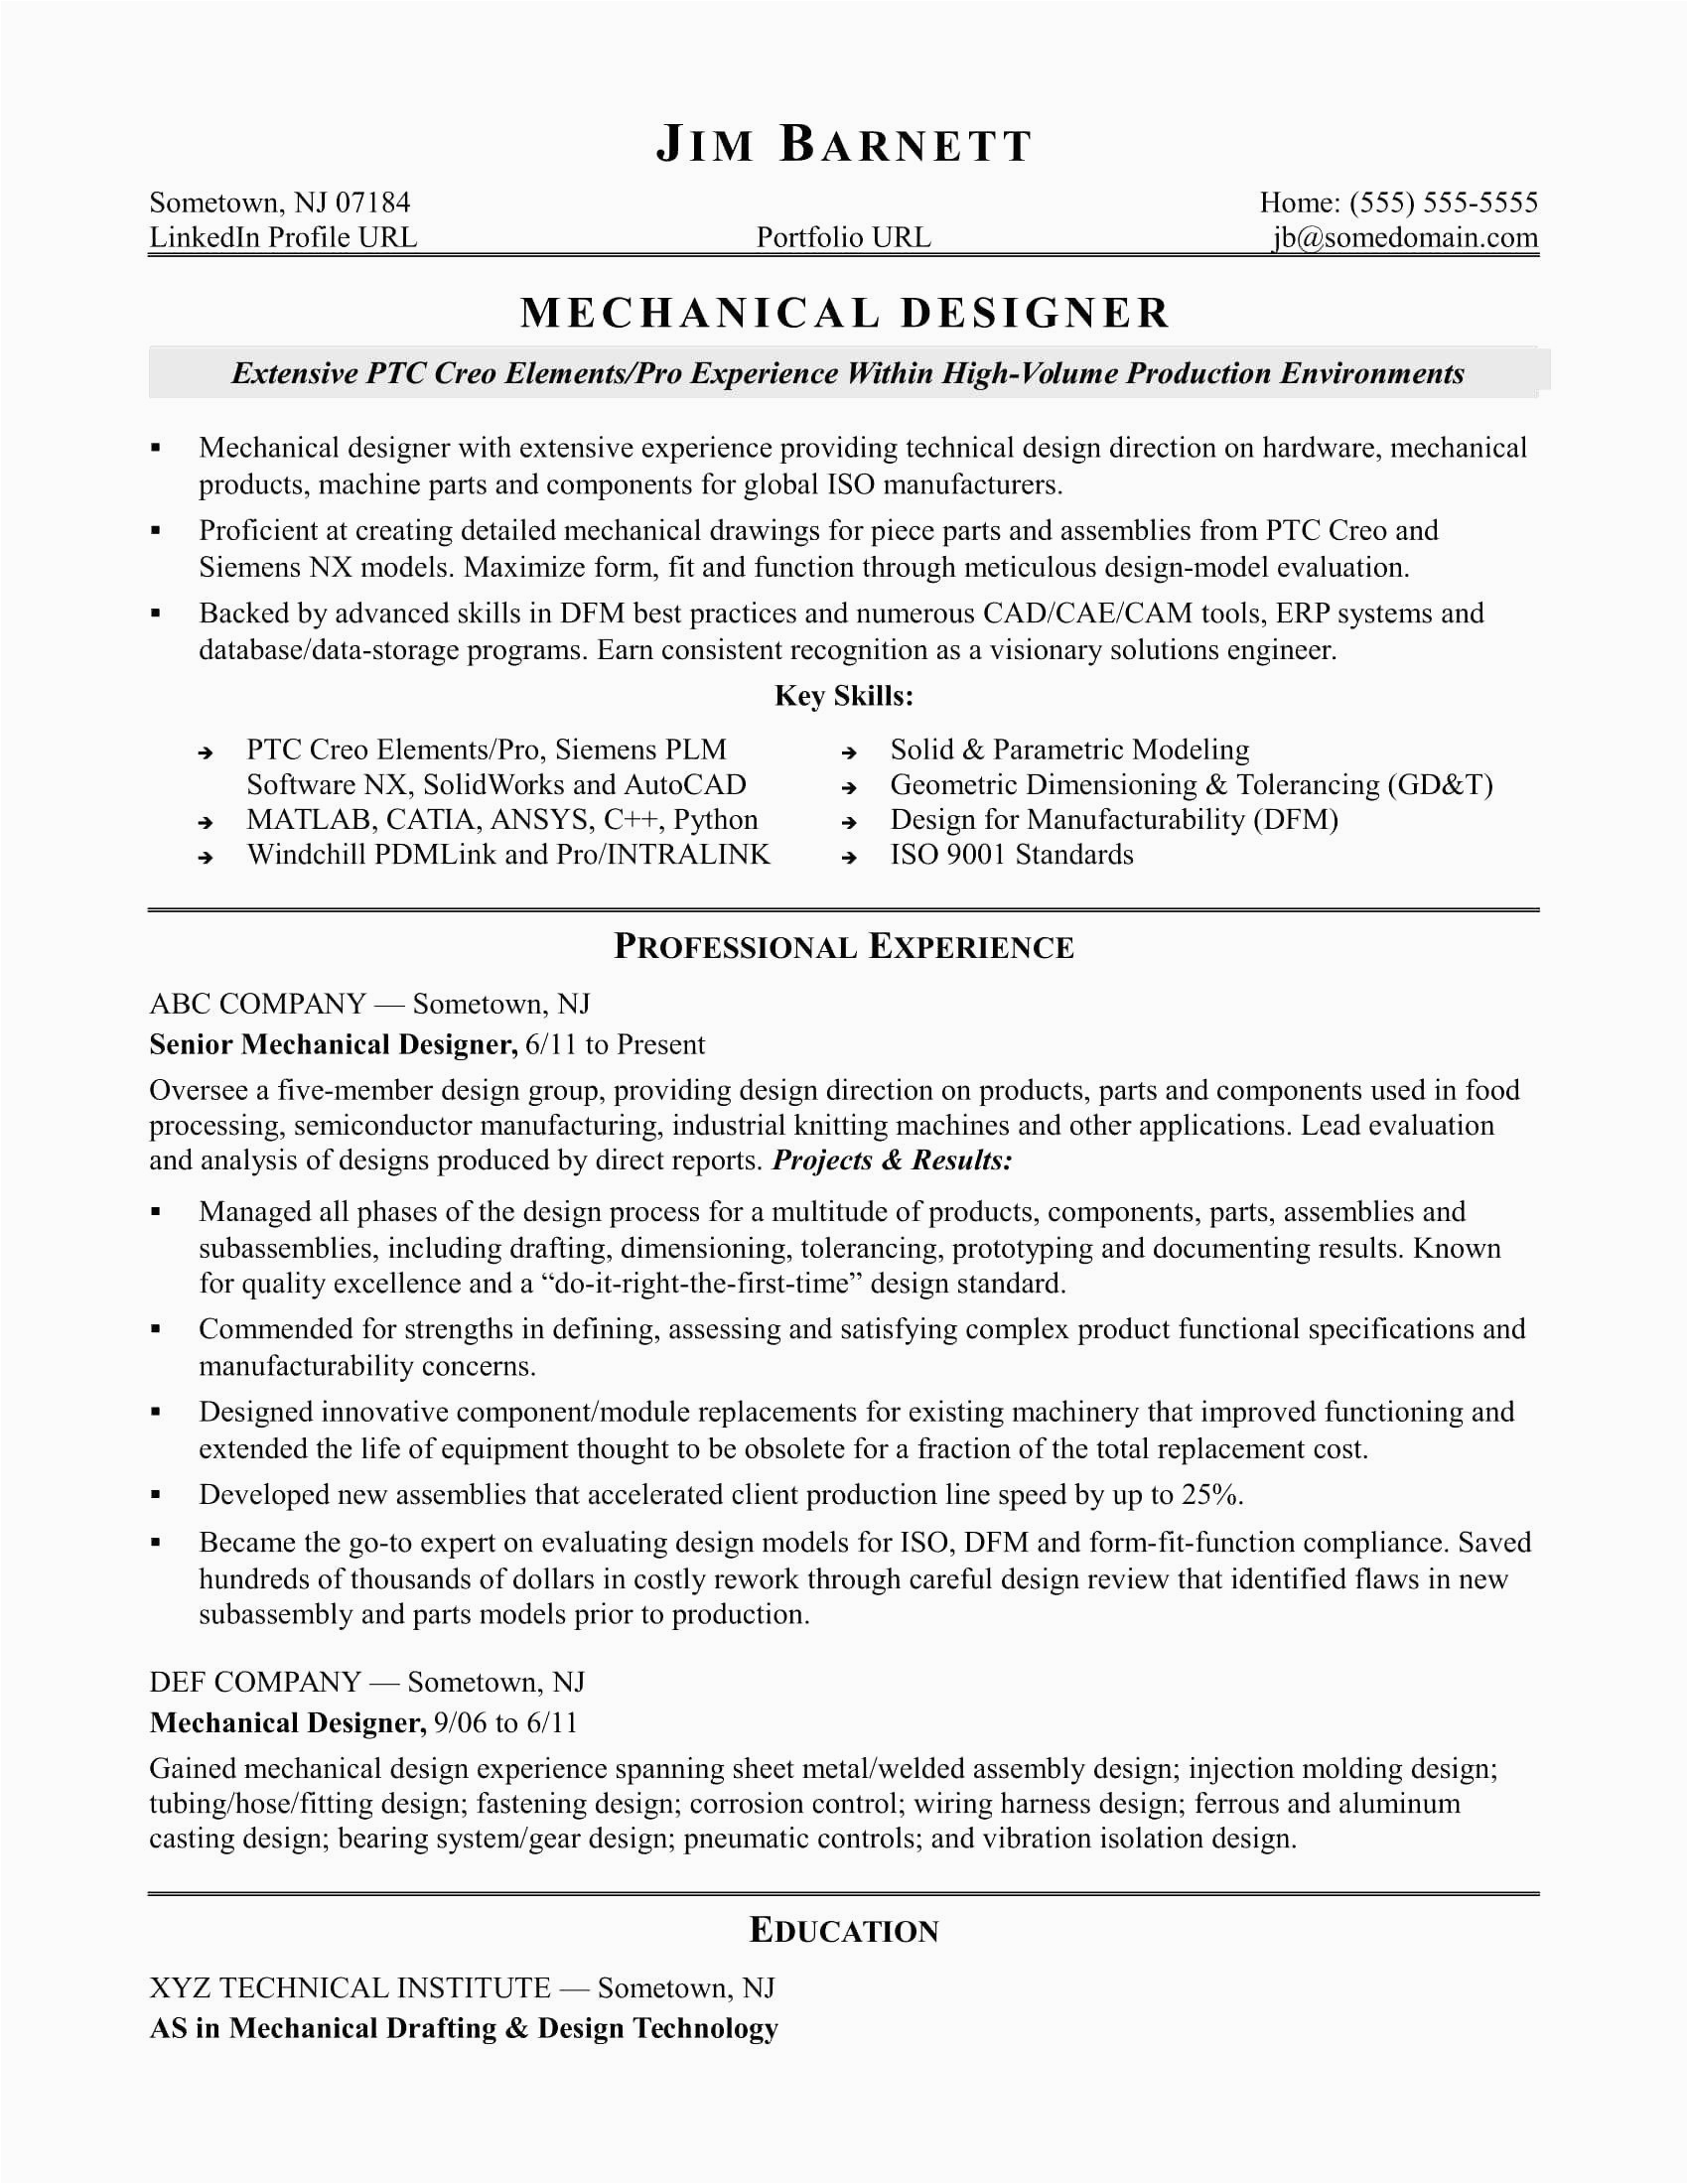 Resume Samples for Reentering the Workforce Reentering the Workforce Resume Examples Unique 11 12 Reentering the